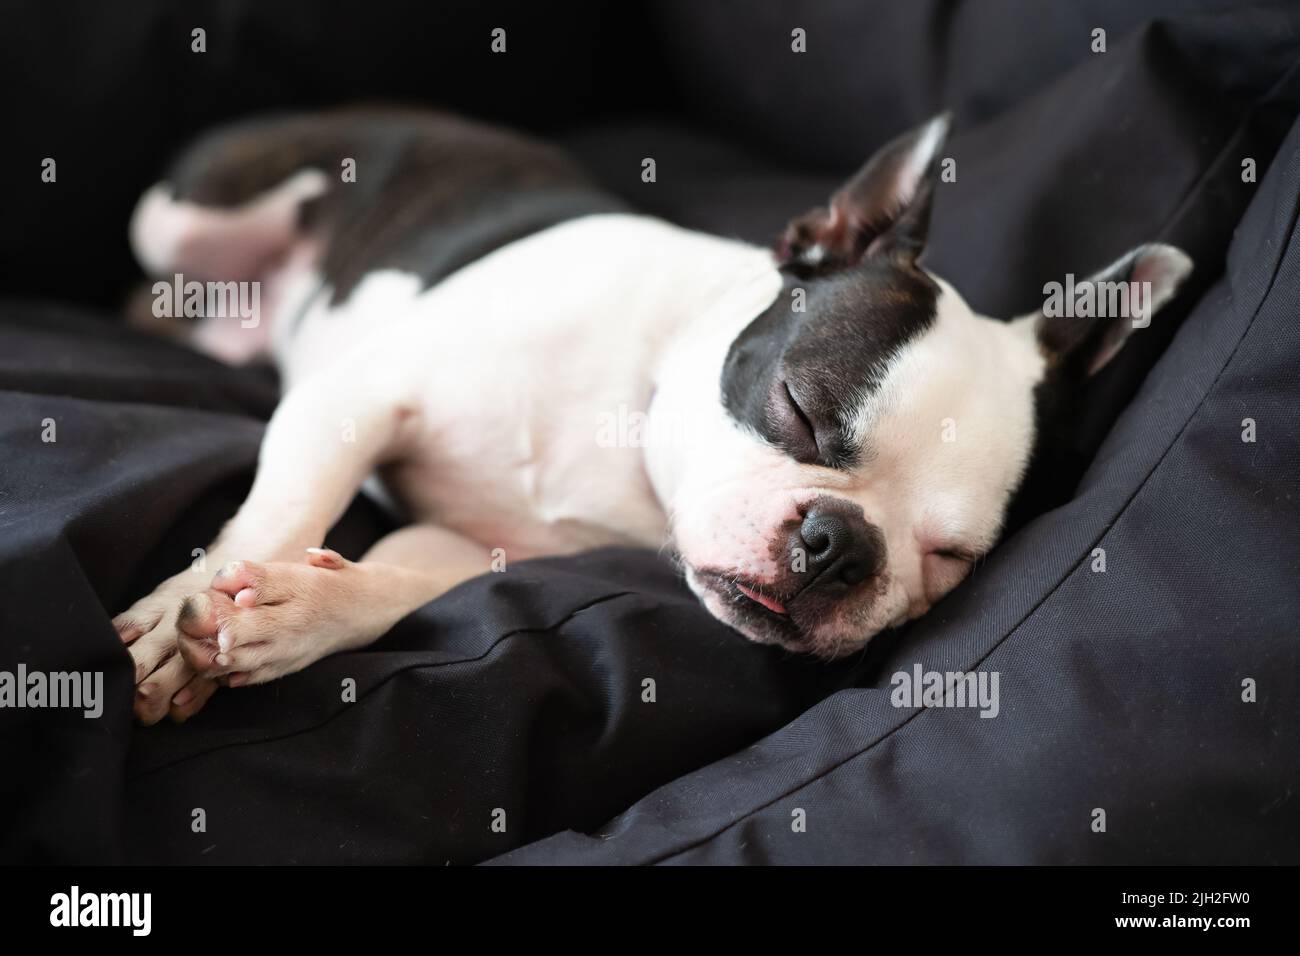 Boston Terrier dog lying down sleeping in a large black comfy bed. She has her tongue slightly out as she sleeps. Stock Photo